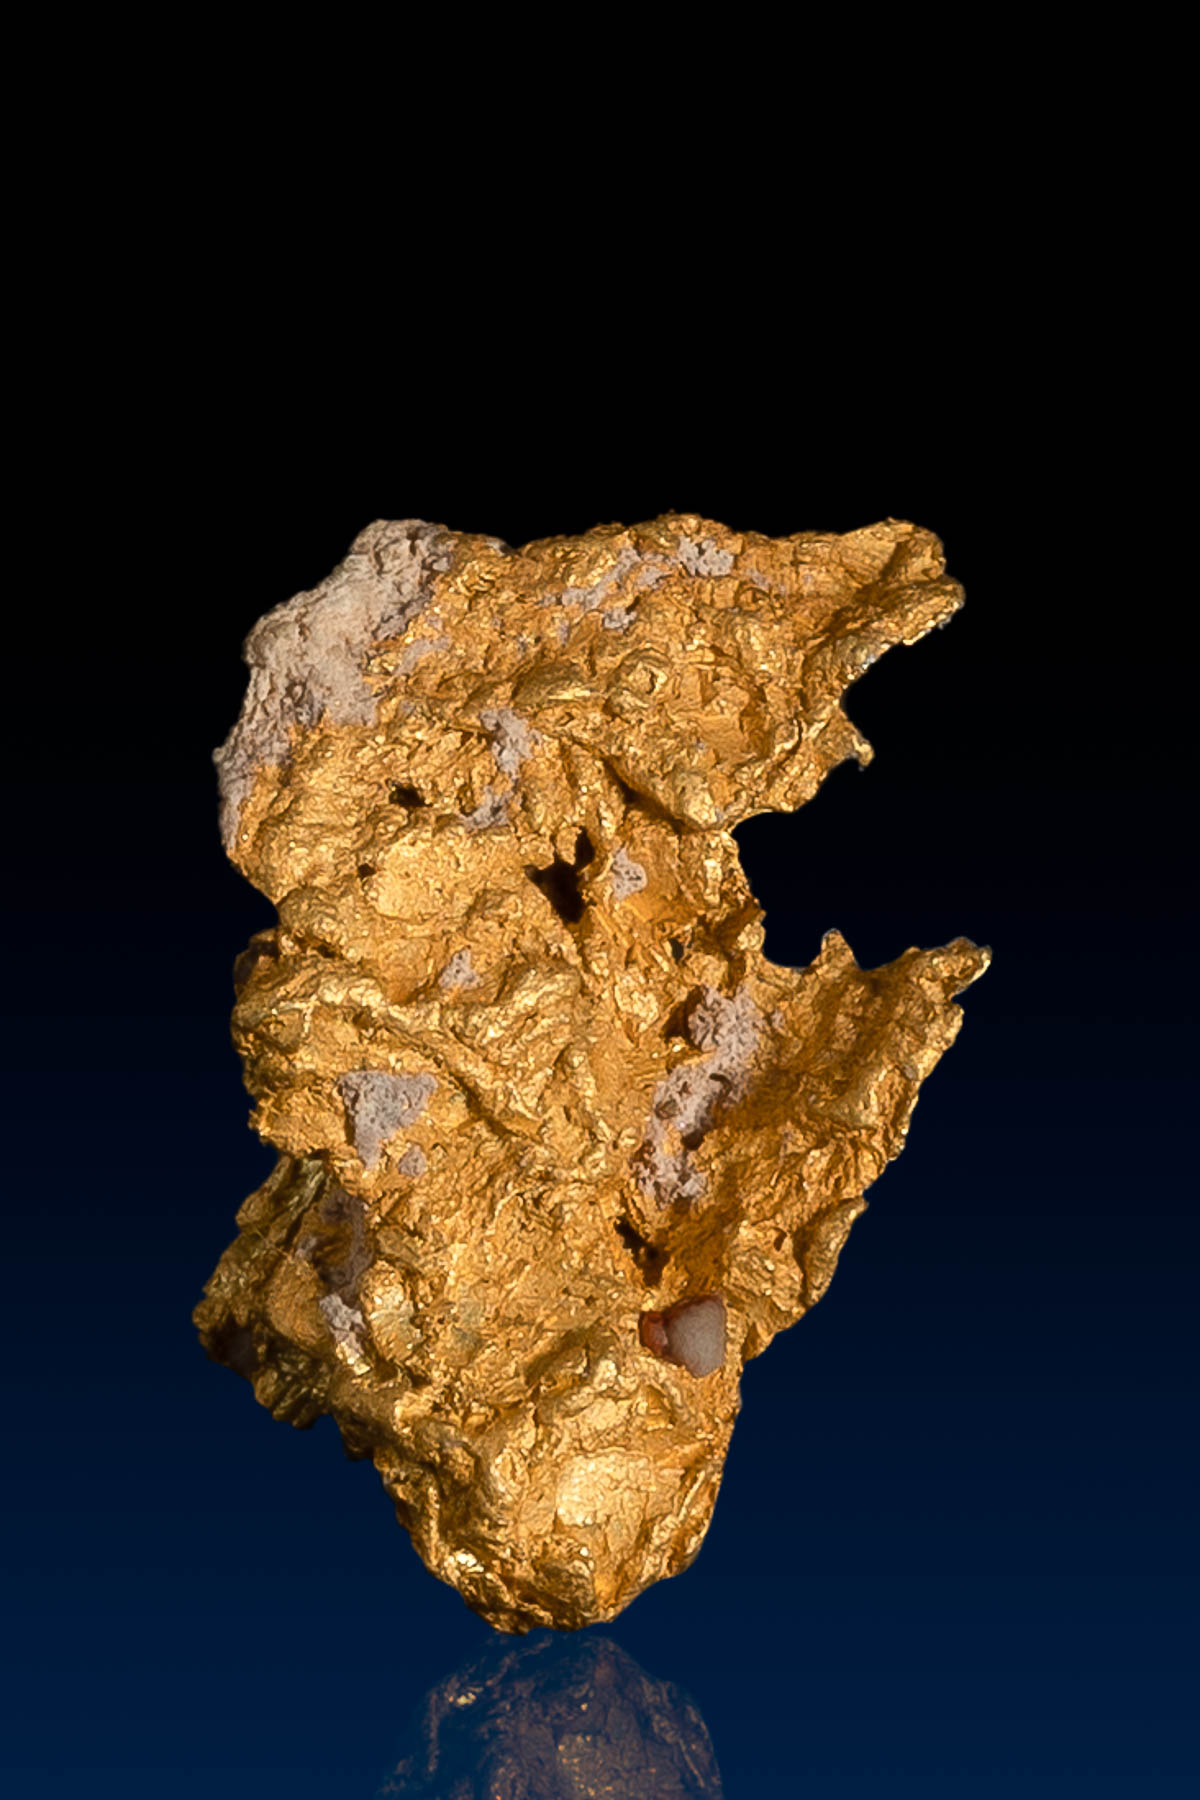 Arizona Natural Gold Nugget with a Mouth - 1.75 grams